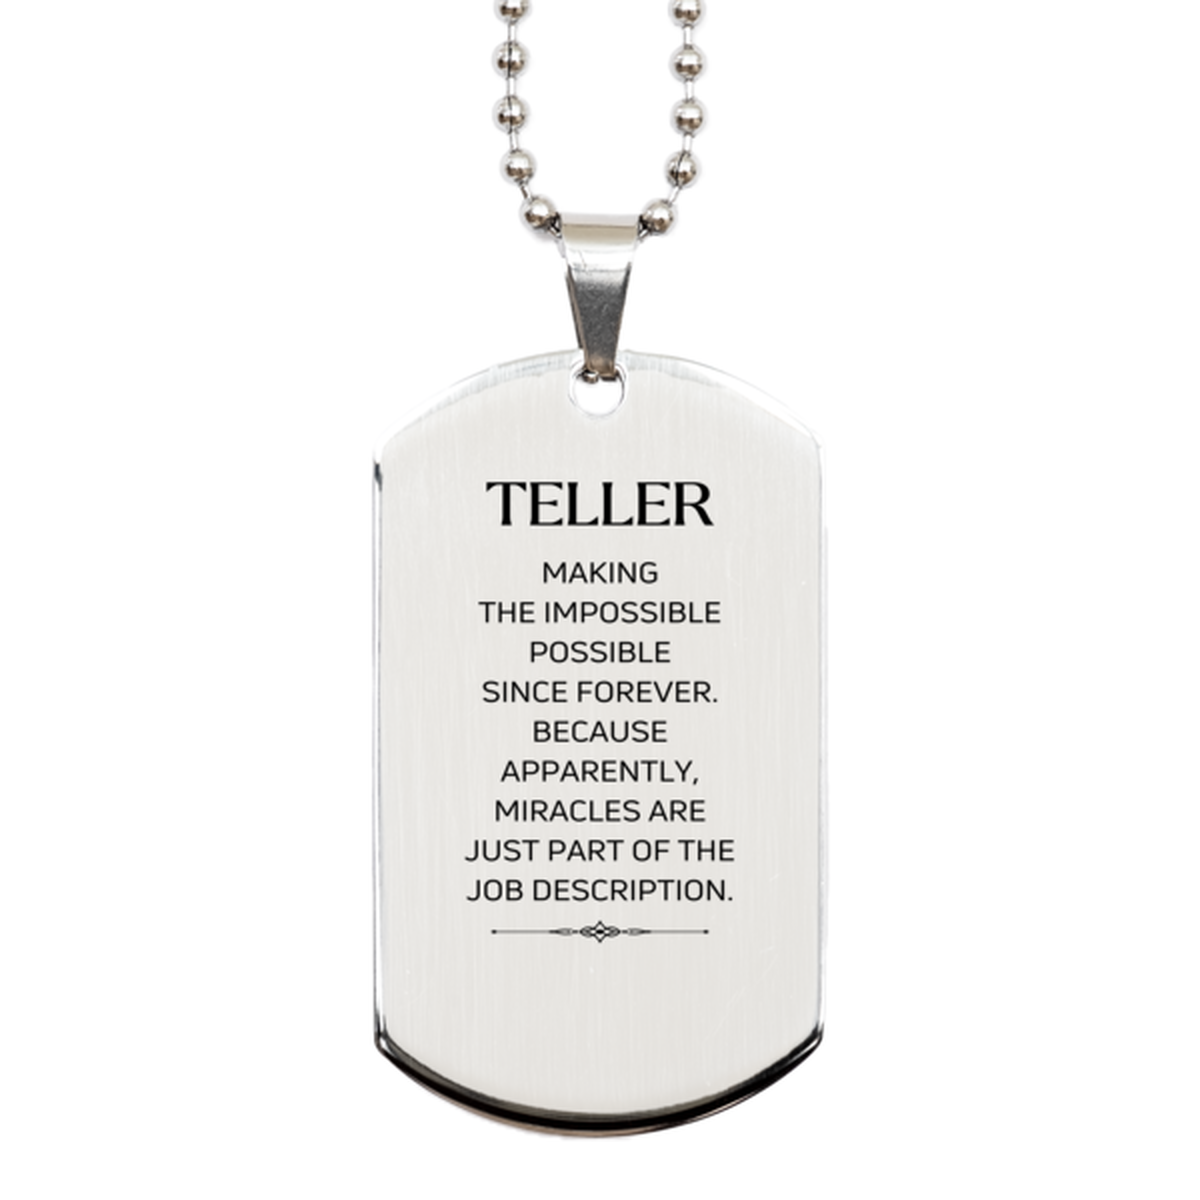 Funny Teller Gifts, Miracles are just part of the job description, Inspirational Birthday Silver Dog Tag For Teller, Men, Women, Coworkers, Friends, Boss